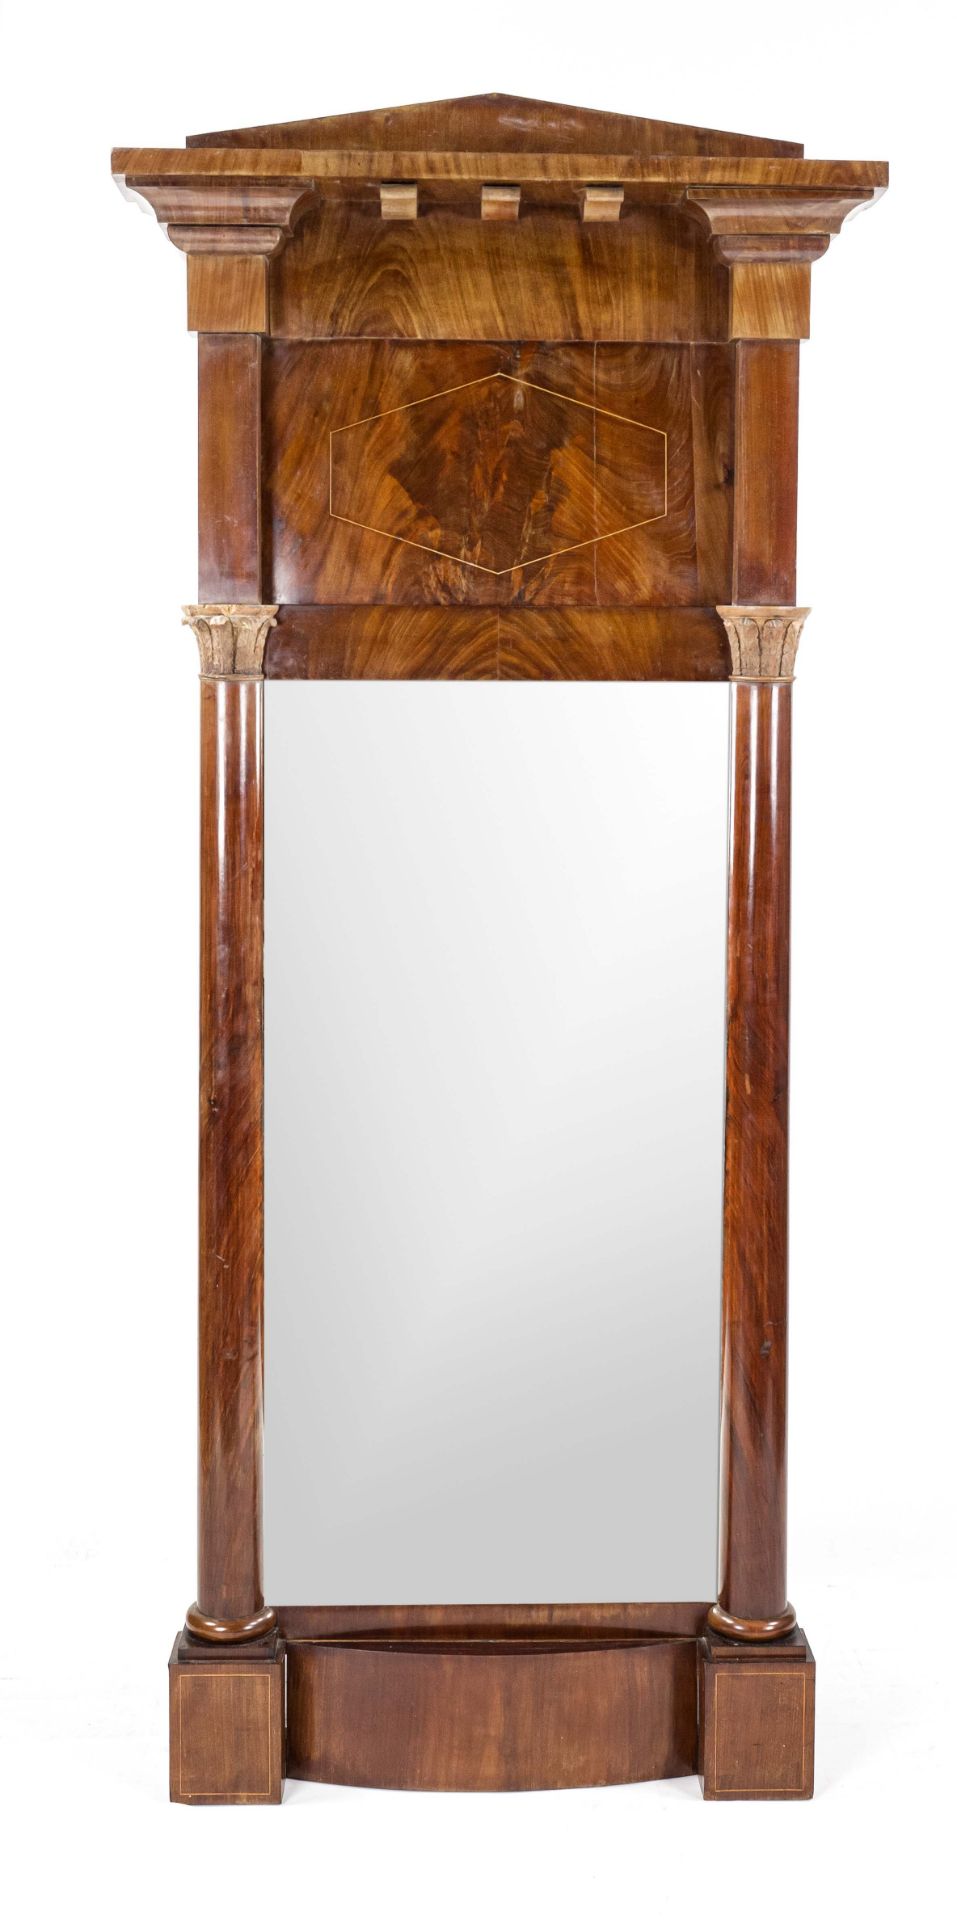 Biedermeier wall mirror, early 19th century, mahogany with thread inlay, flanked by 2 full columns